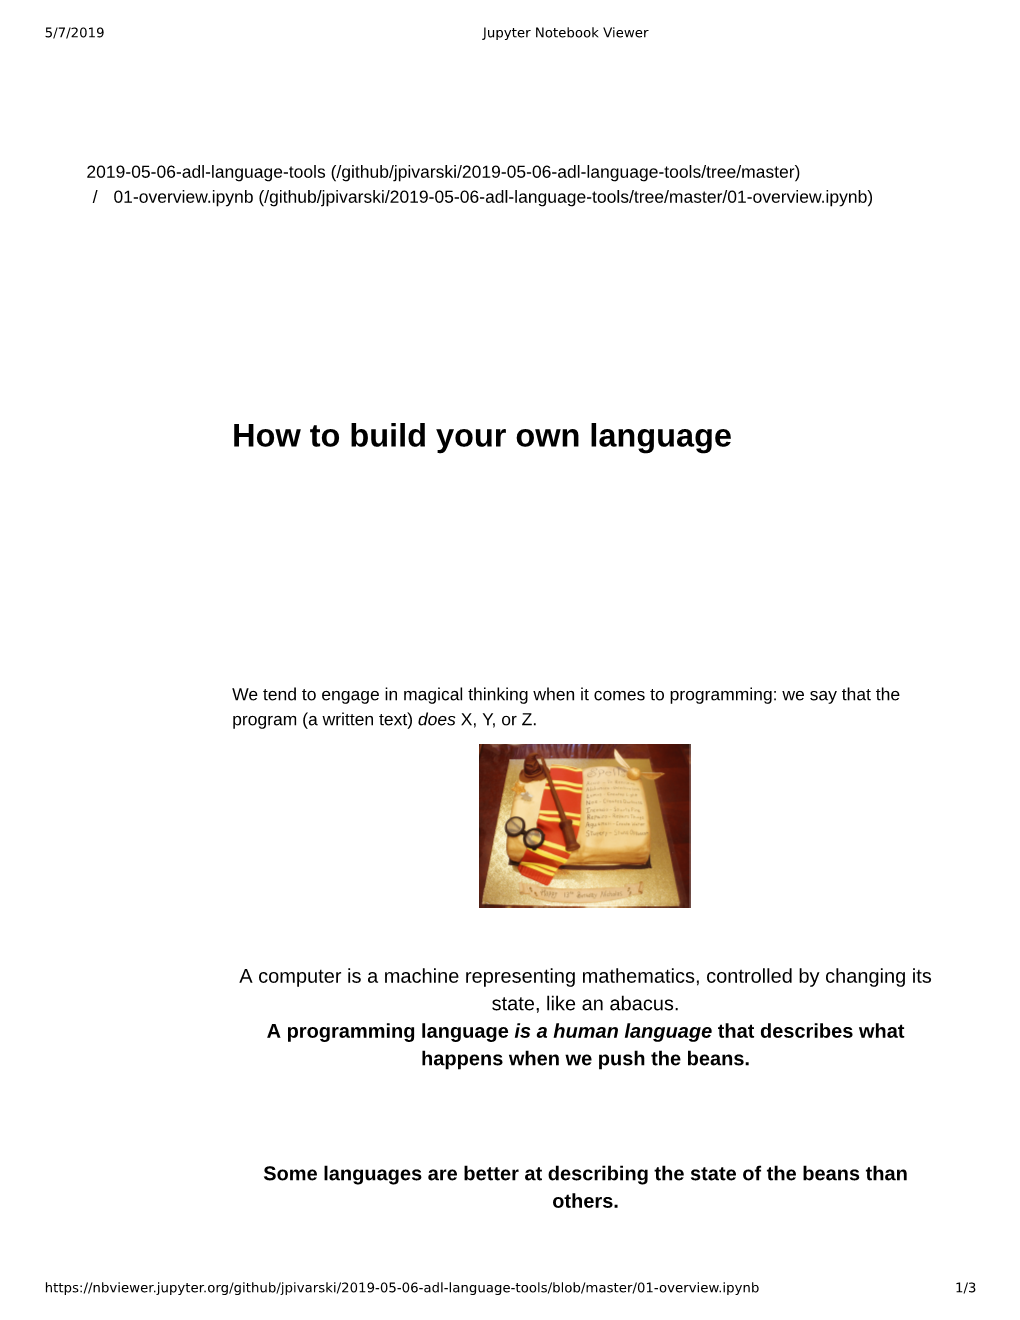 How to Build Your Own Language